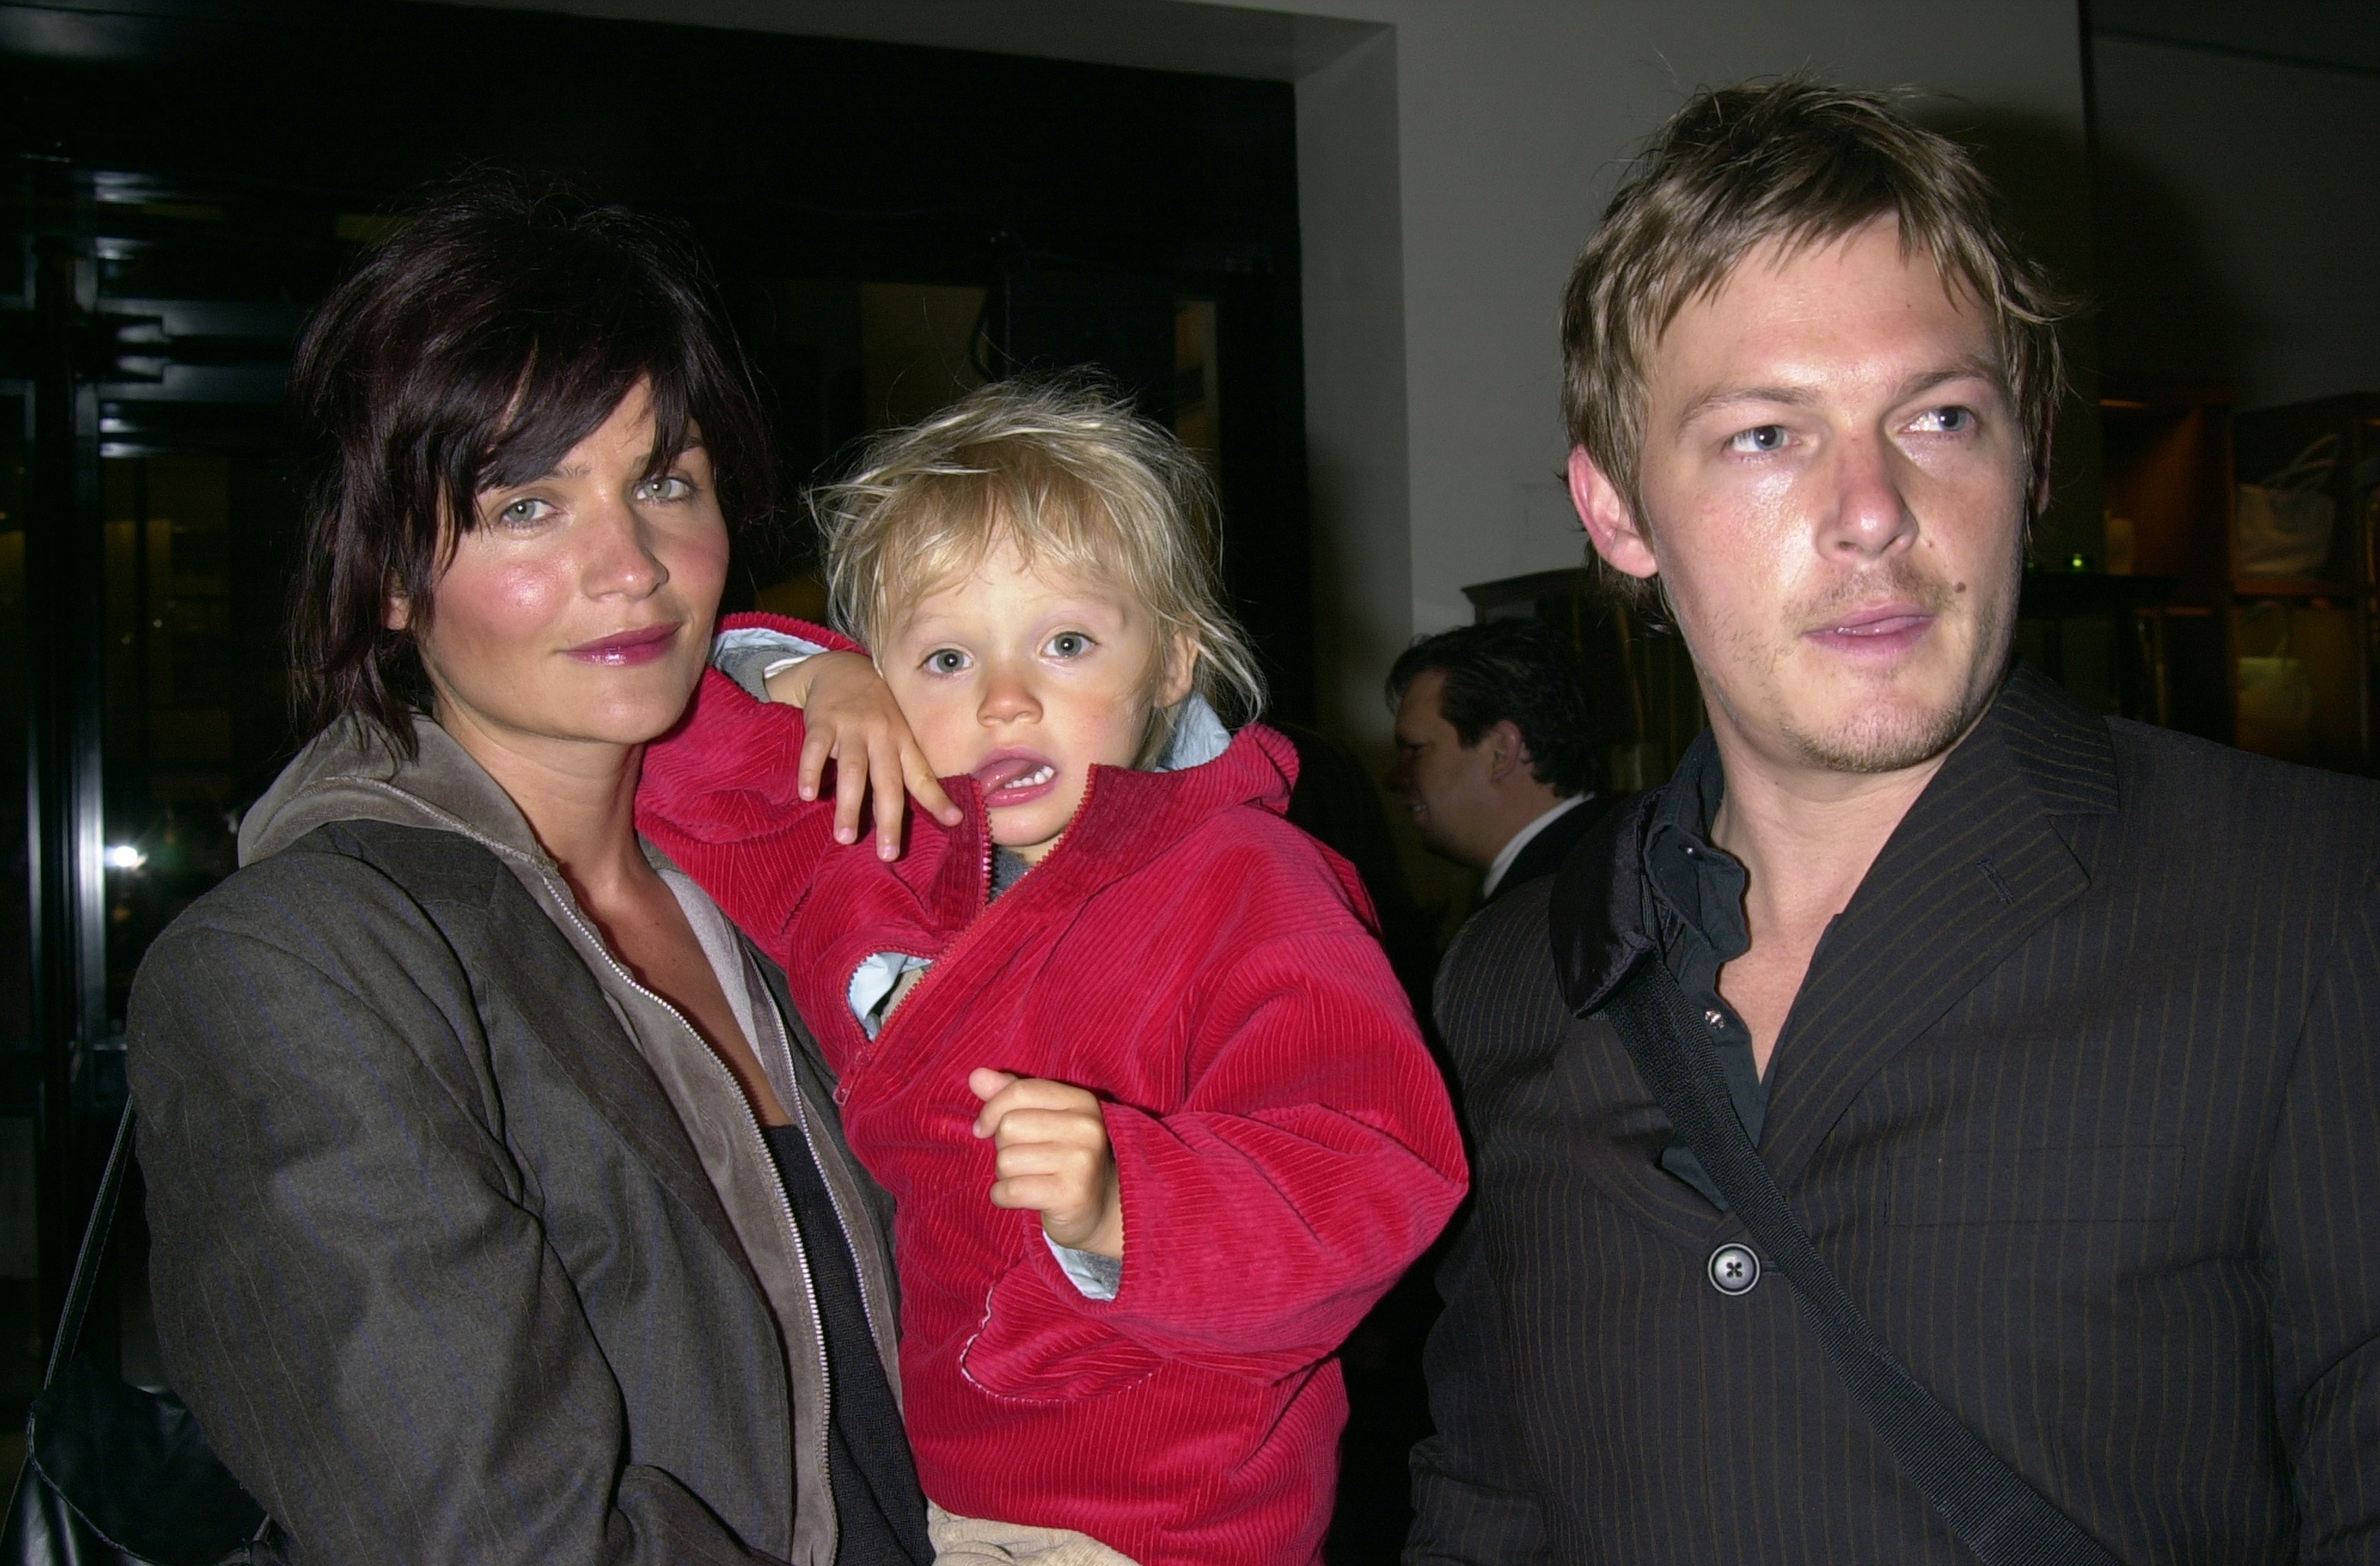 <p>Supermodel Helena Christensen and model-turned-actor Norman Reedus, who dated from 1998 to 2003, took son Mingus to a Lacoste benefit for UNICEF in New York City on May 9, 2002, when he was 2. Keep reading to see what Mingus looks like now as he follow in his parents' footsteps...</p>